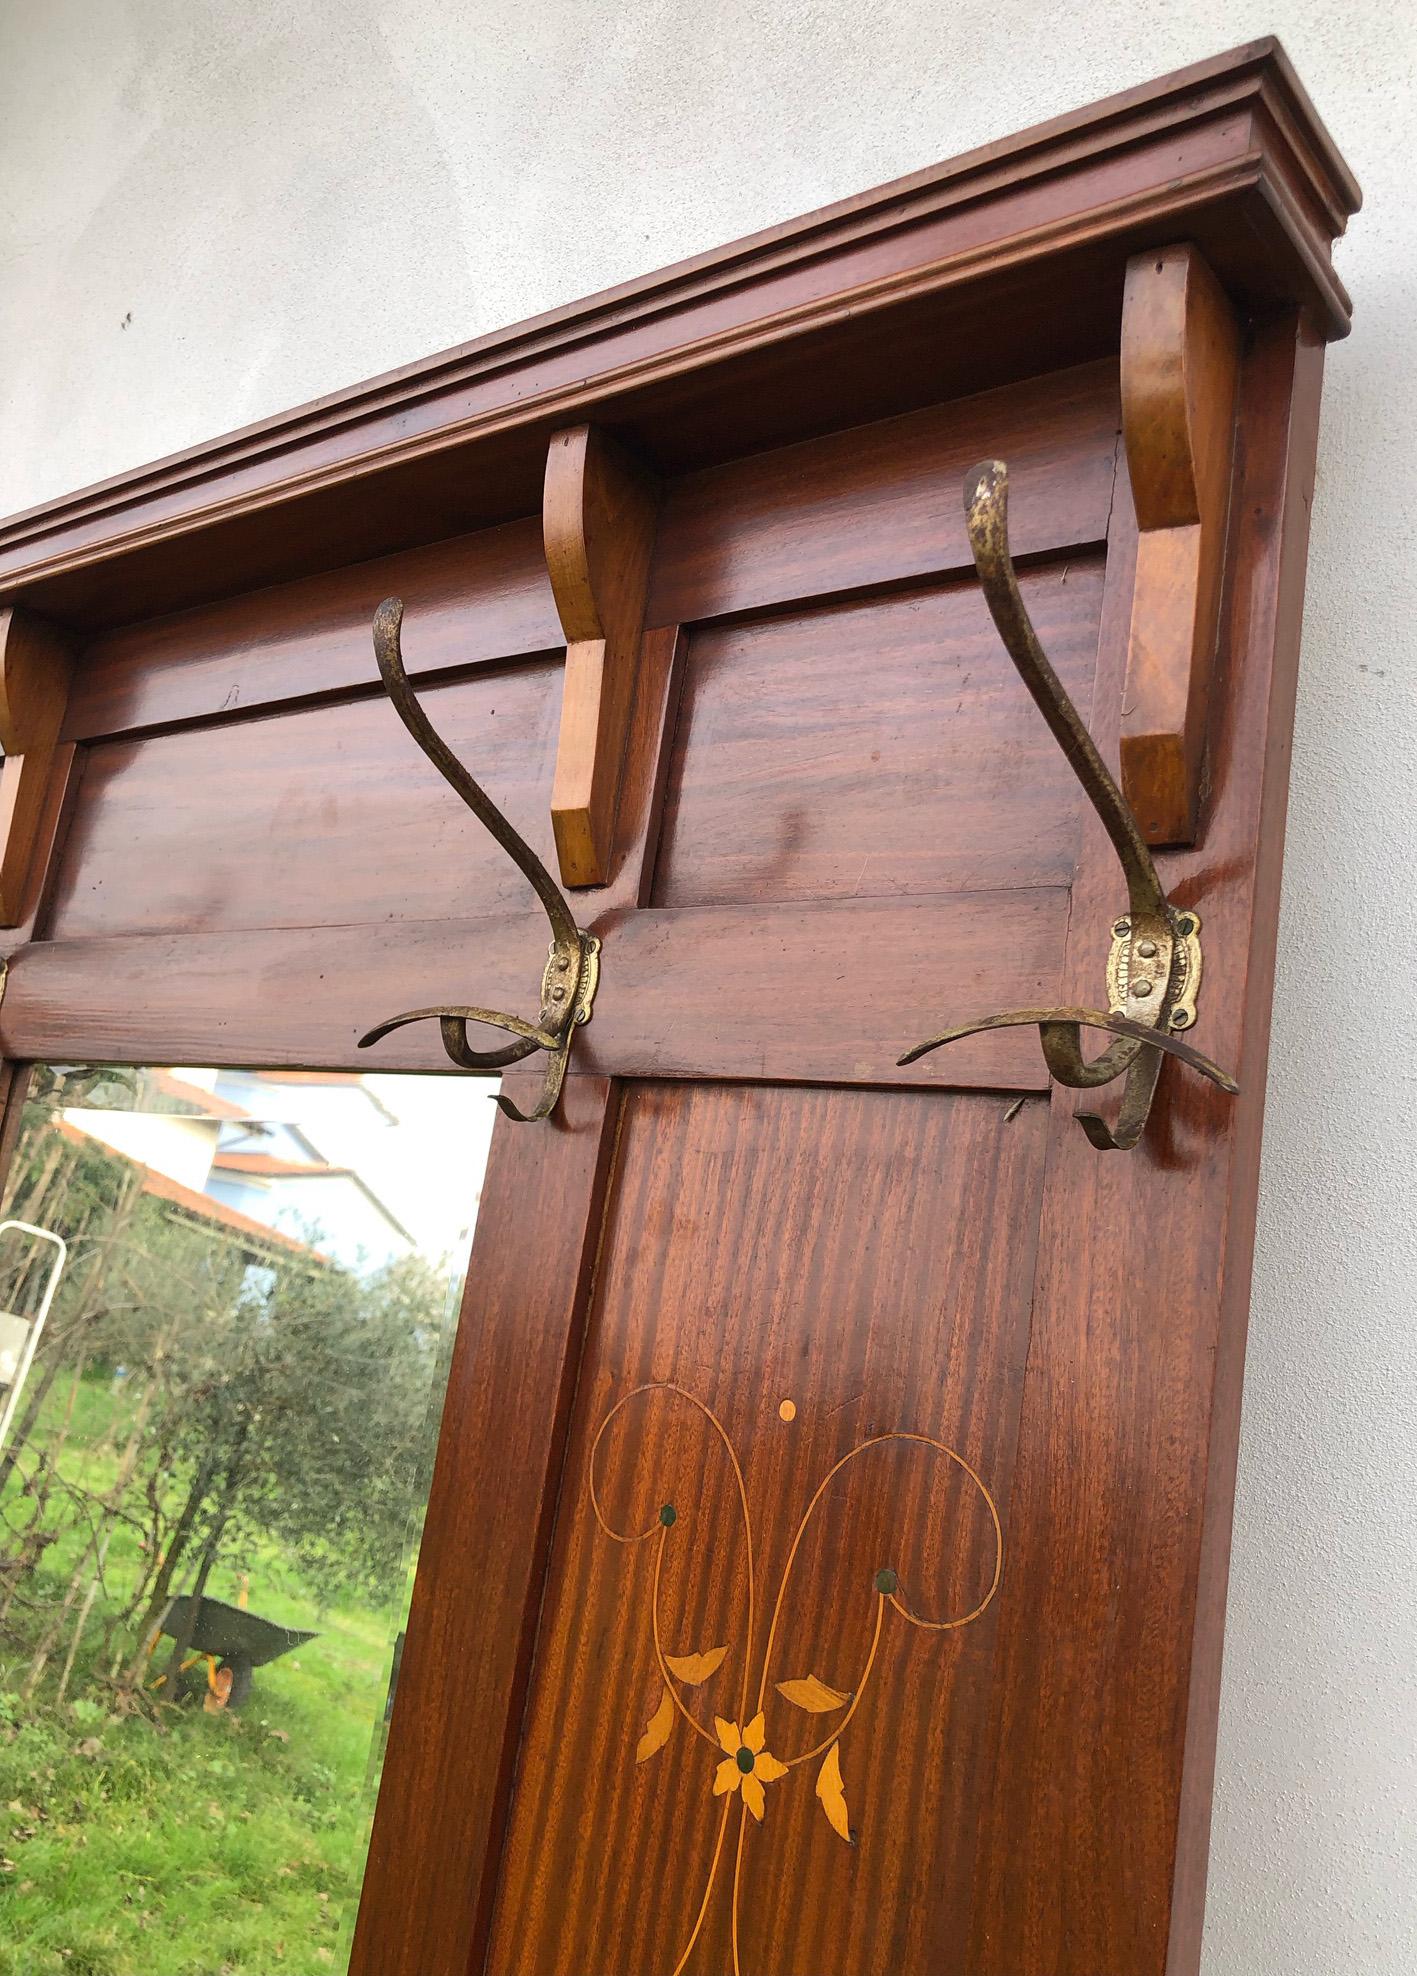 Early 20th Italian coat hanger inlaid with brass accessories, umbrella in the lower part.
It is very elegant, practical and comfortable. 
It was located at the entrance of an ancient building.
Original brass handles. 
Comes from an old luxury